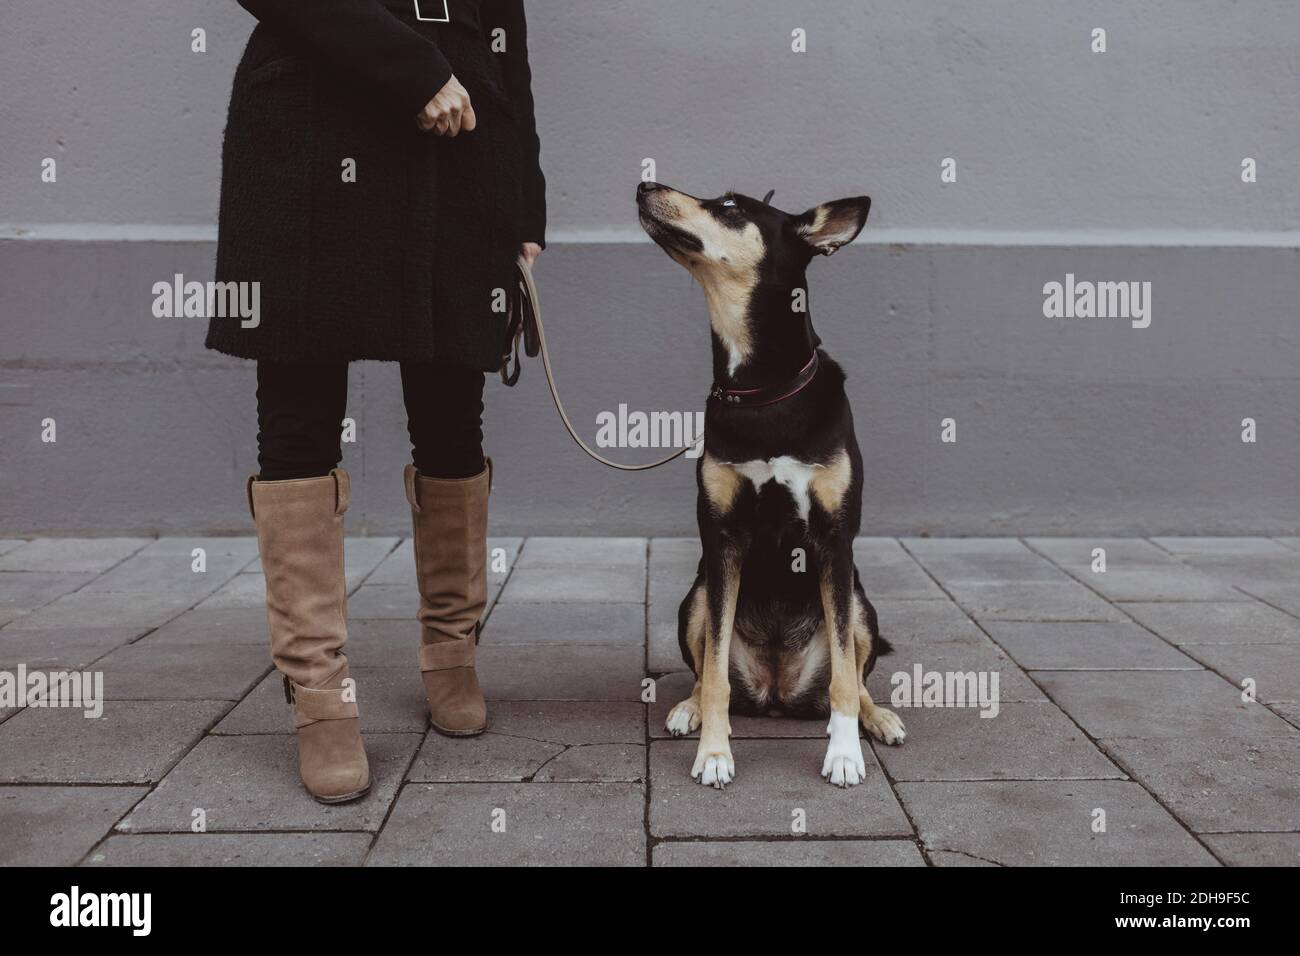 Dog looking up at female pet owner standing on footpath in city Stock Photo